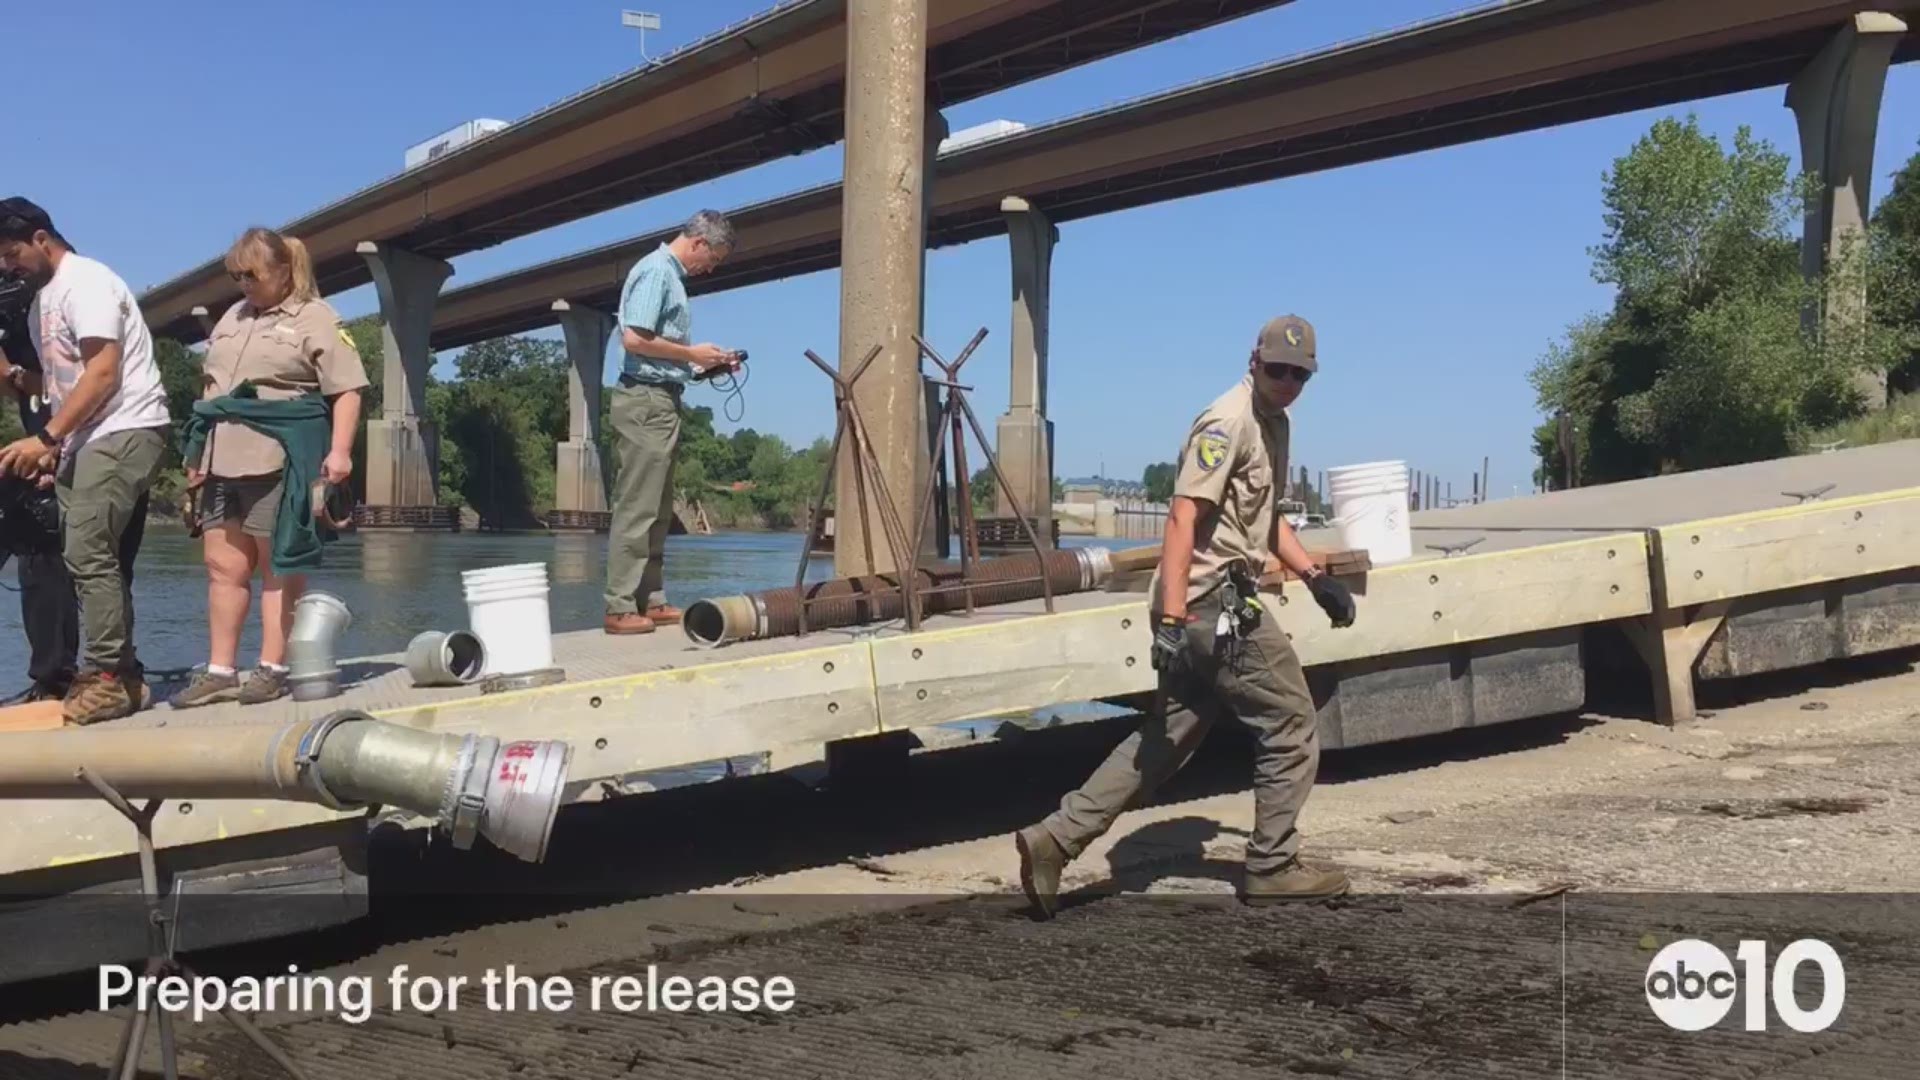 The California Department of Fish and Wildlife released 1 million chinook salmon smolts at Elkhorn boat launch.